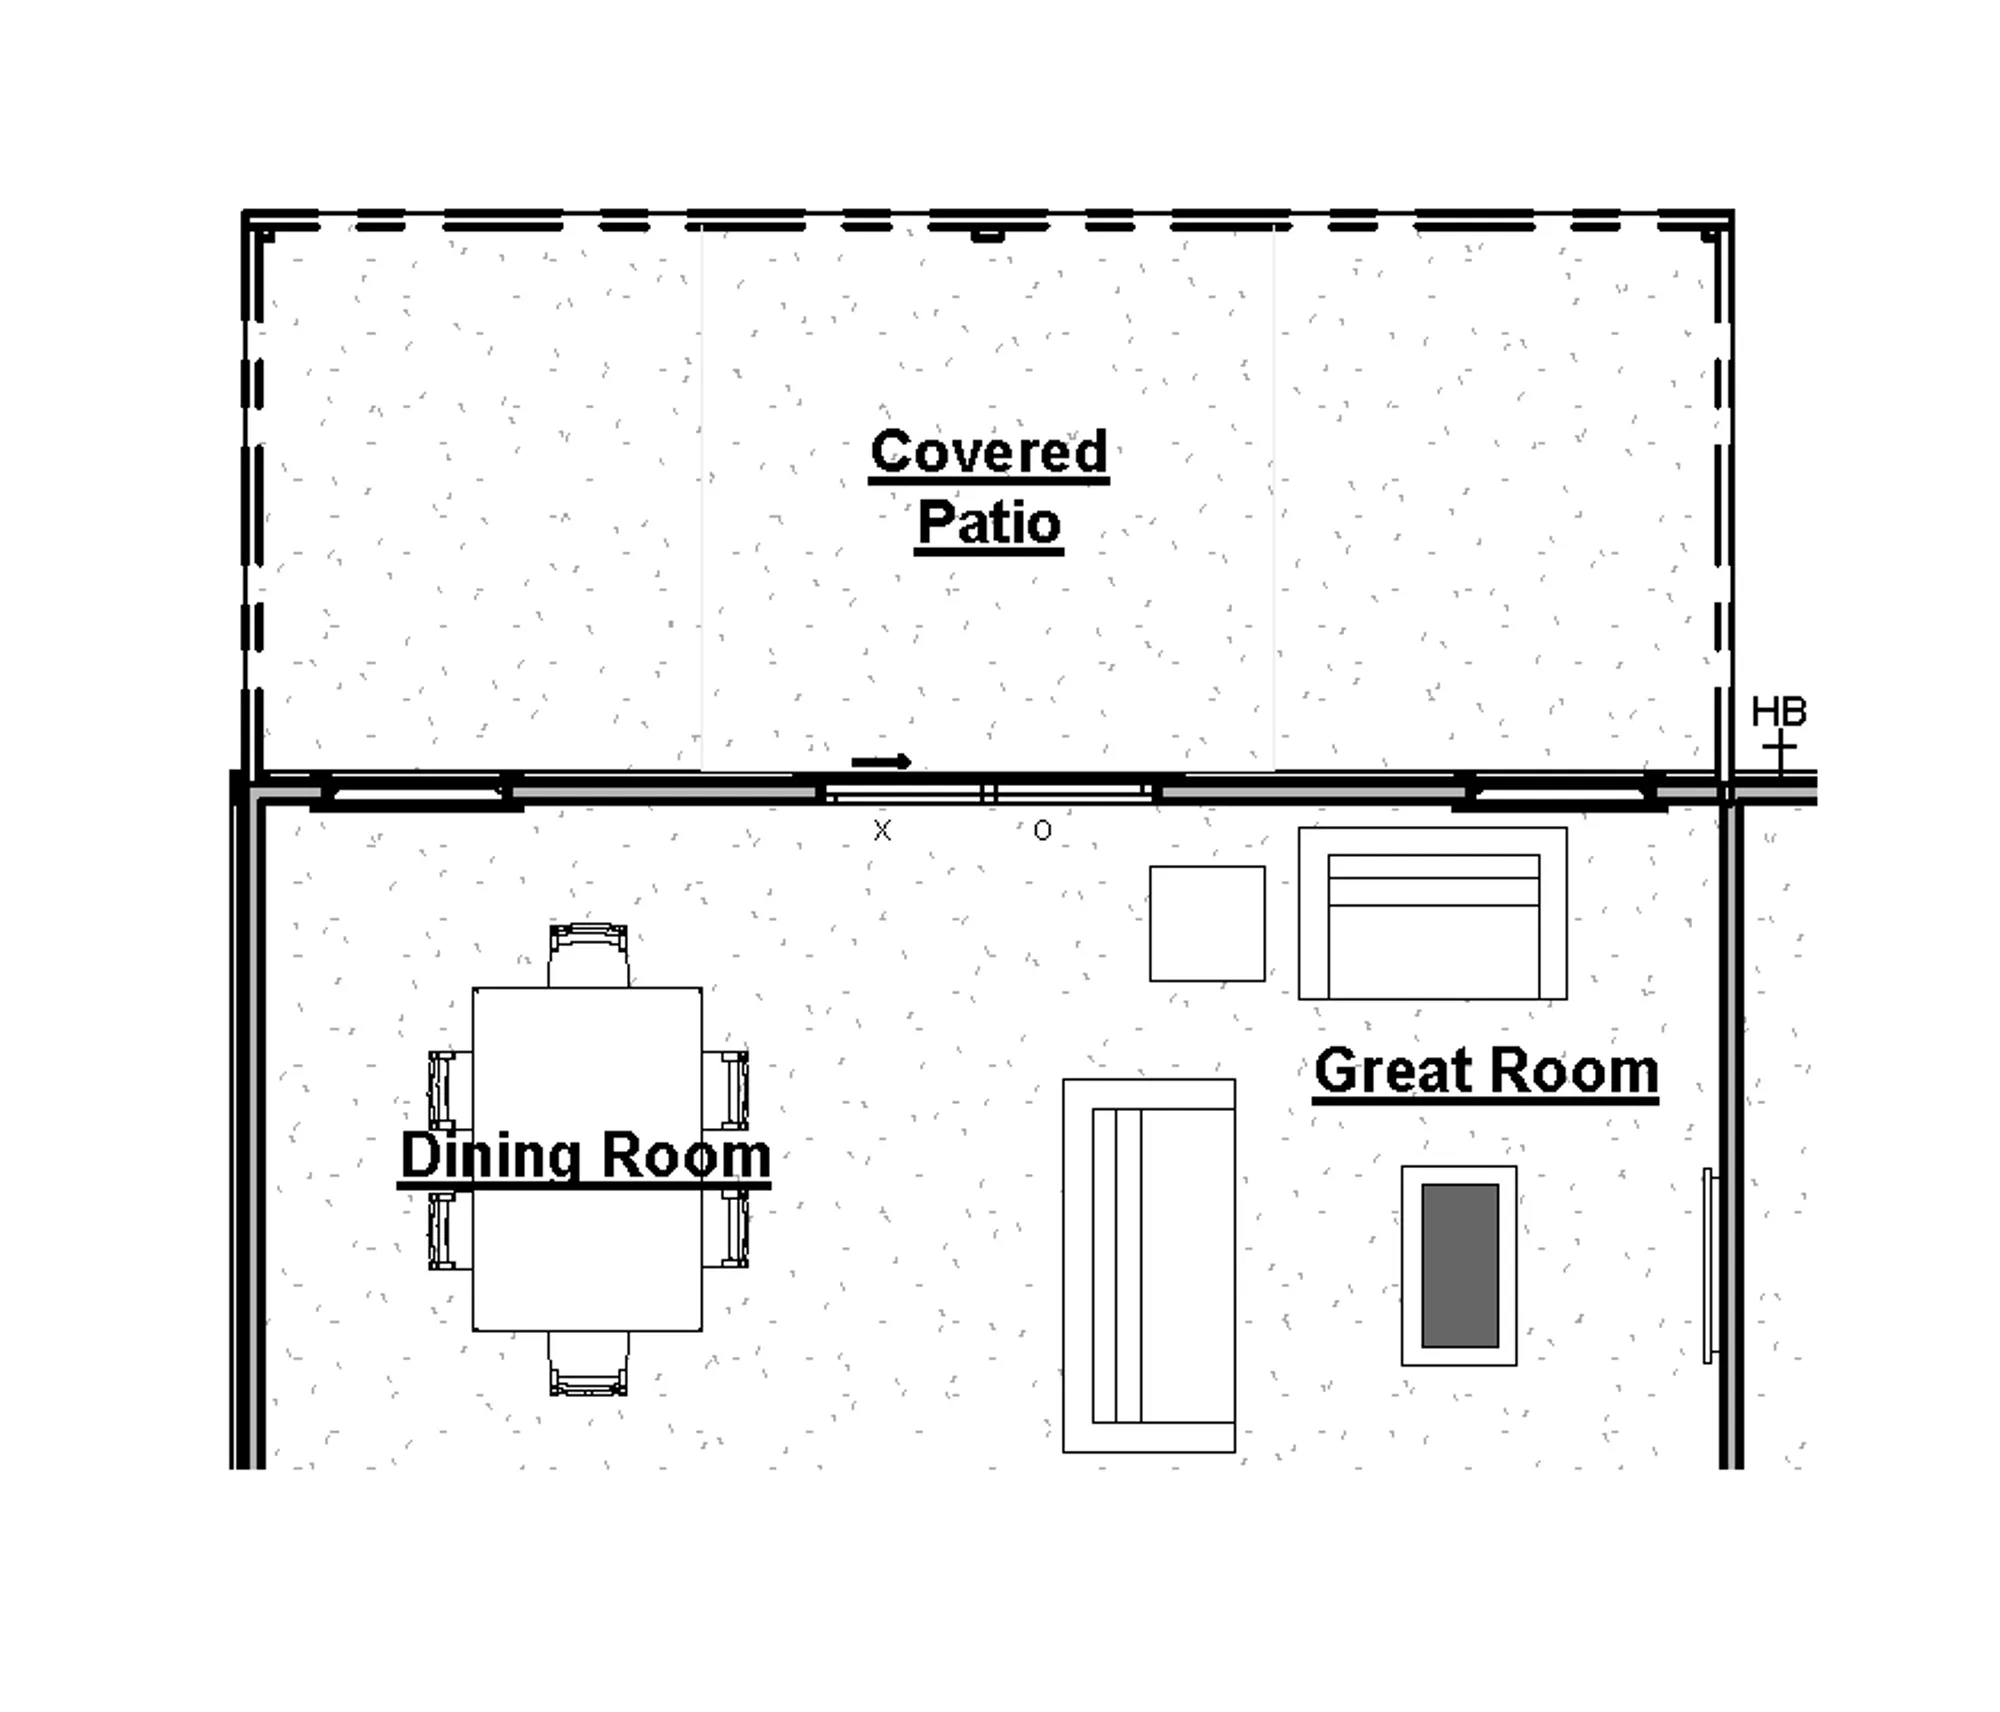 Extended Covered Patio Option - undefined